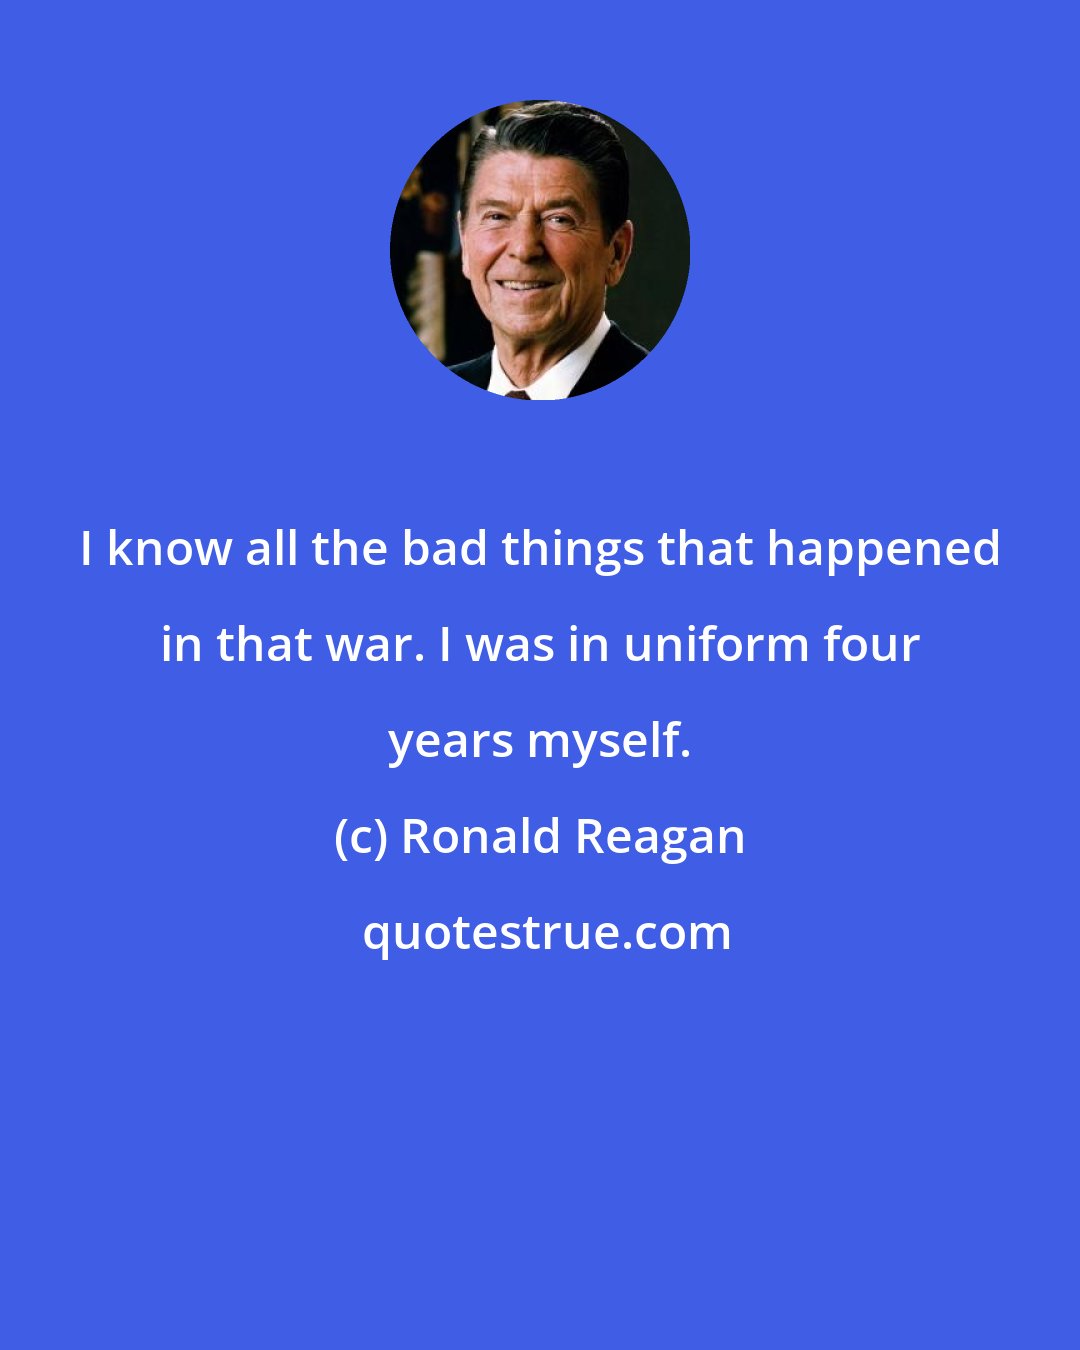 Ronald Reagan: I know all the bad things that happened in that war. I was in uniform four years myself.